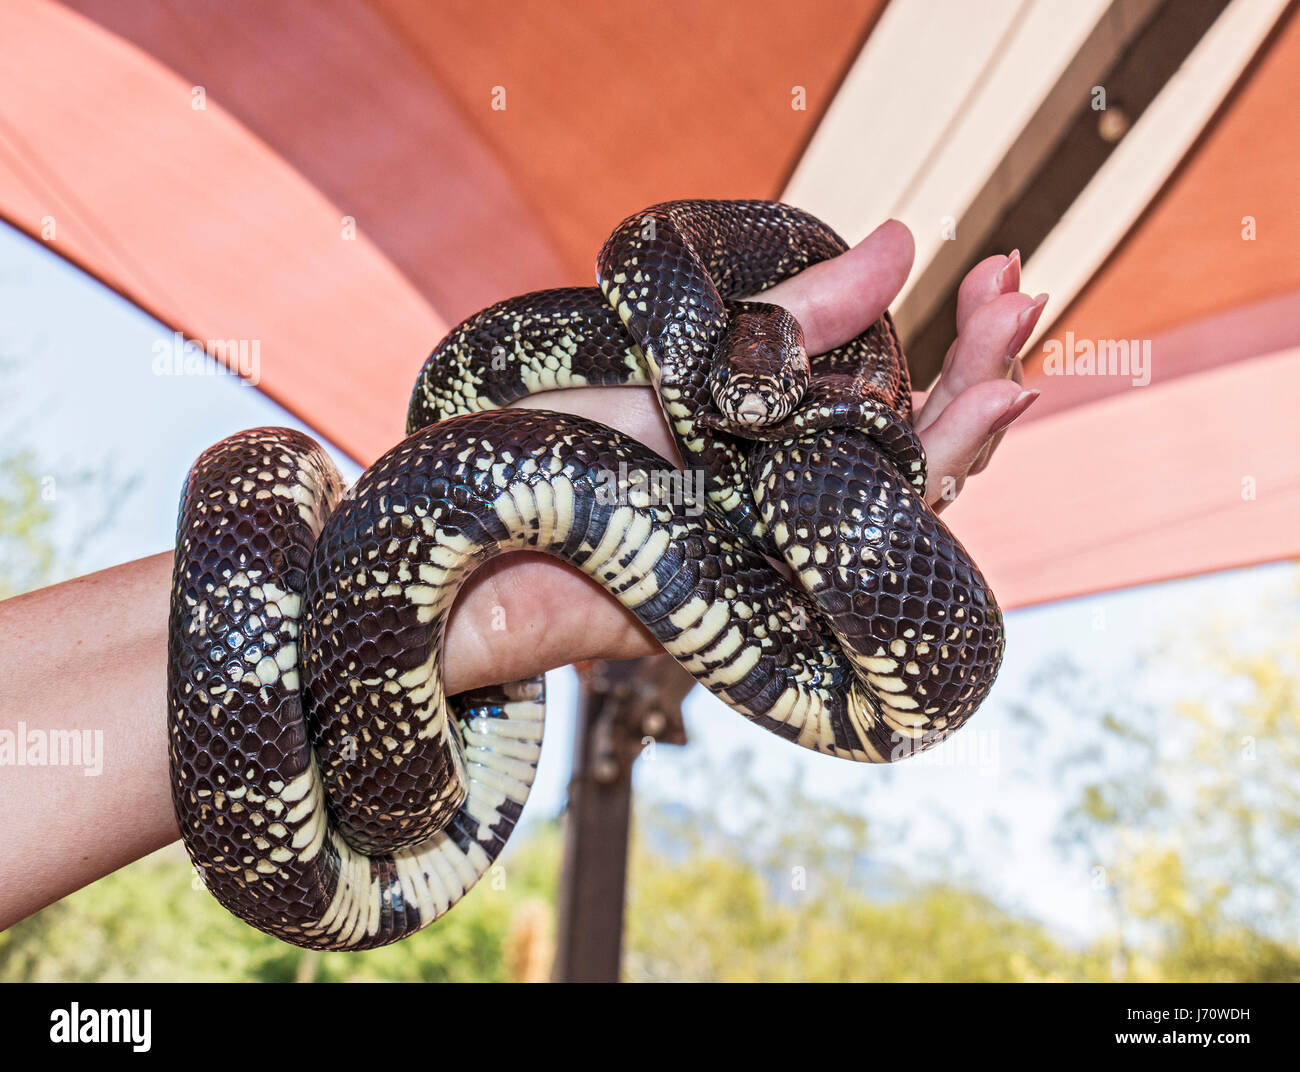 Common king snake, also known as the Eastern kingsnake, or Chain kingsnake, is a harmless  species endemic to the United States and Mexico. It has lon Stock Photo